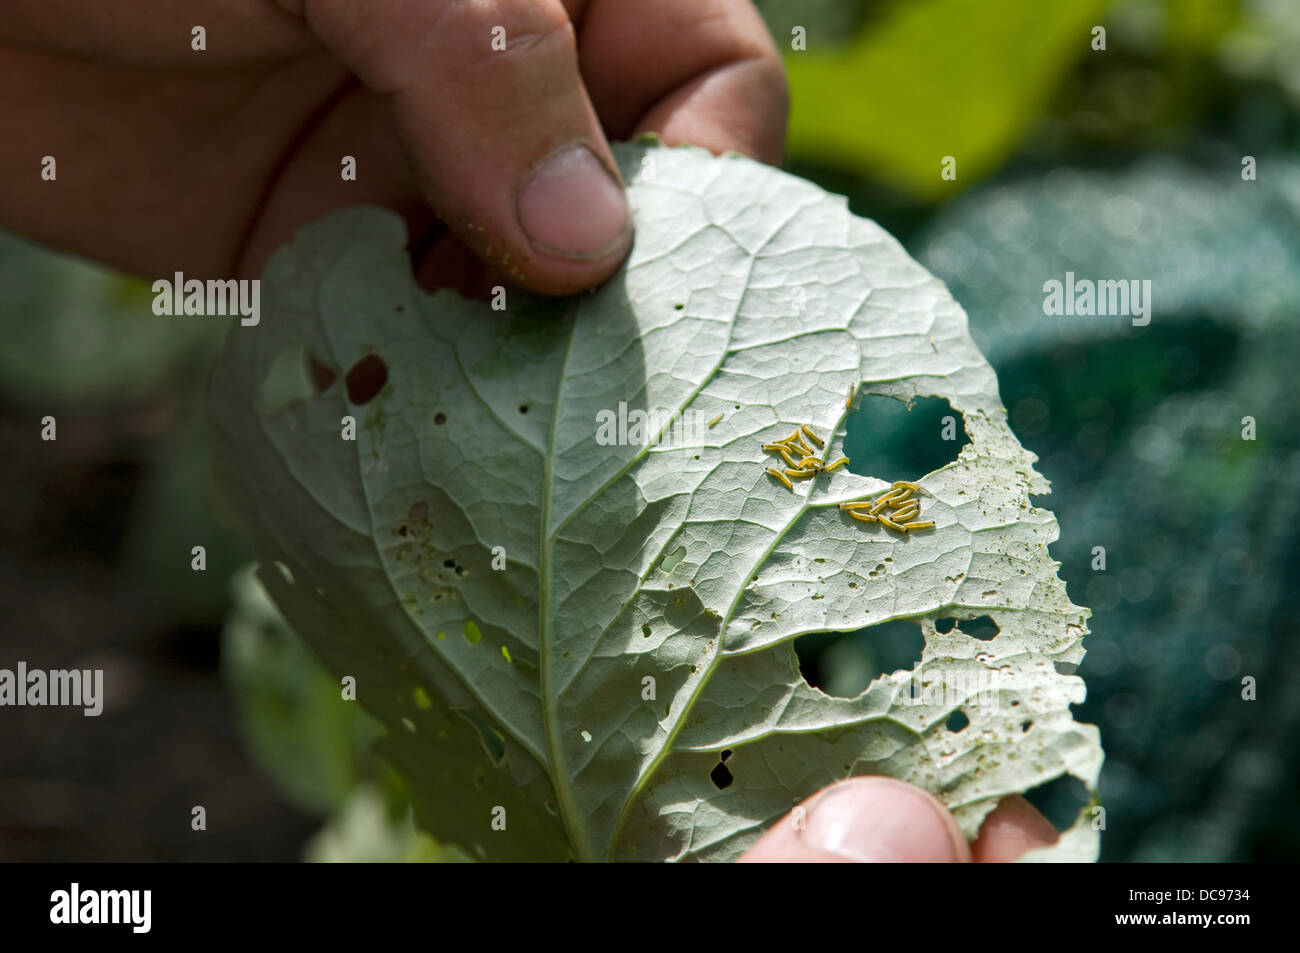 Caucasian man finding cabbage white butterfly caterpillar larvae on home grown cabbage plants, taken in Bristol, UK Stock Photo